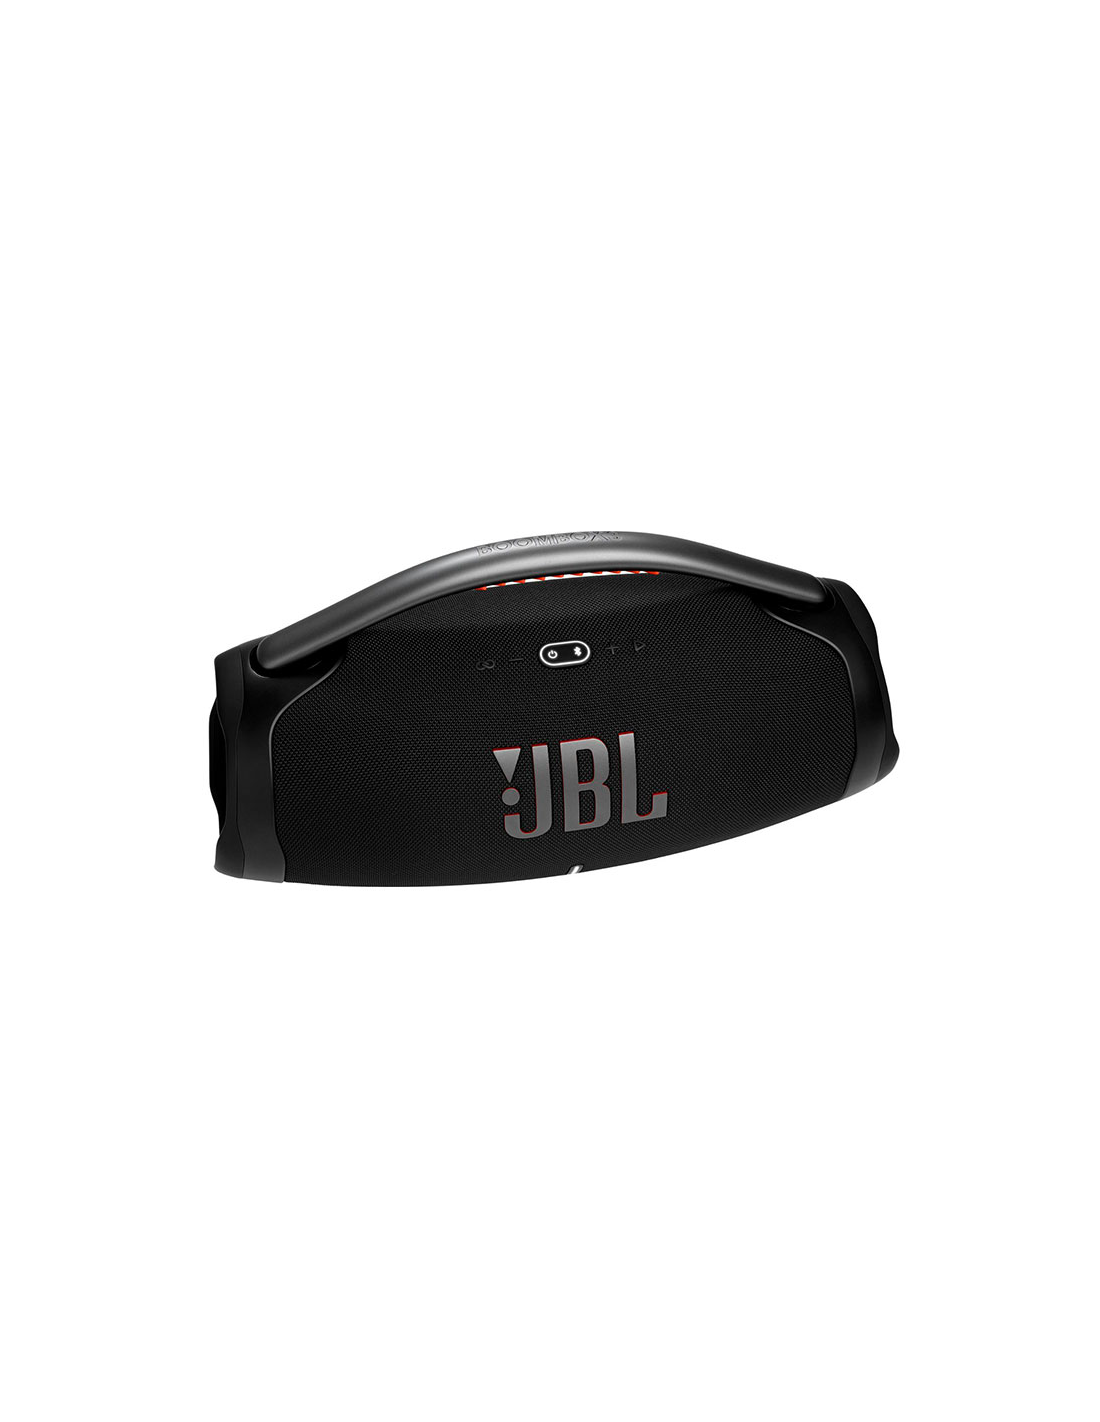 Parlante Bluetooth Jbl Party 110 160w Rms +-12hs